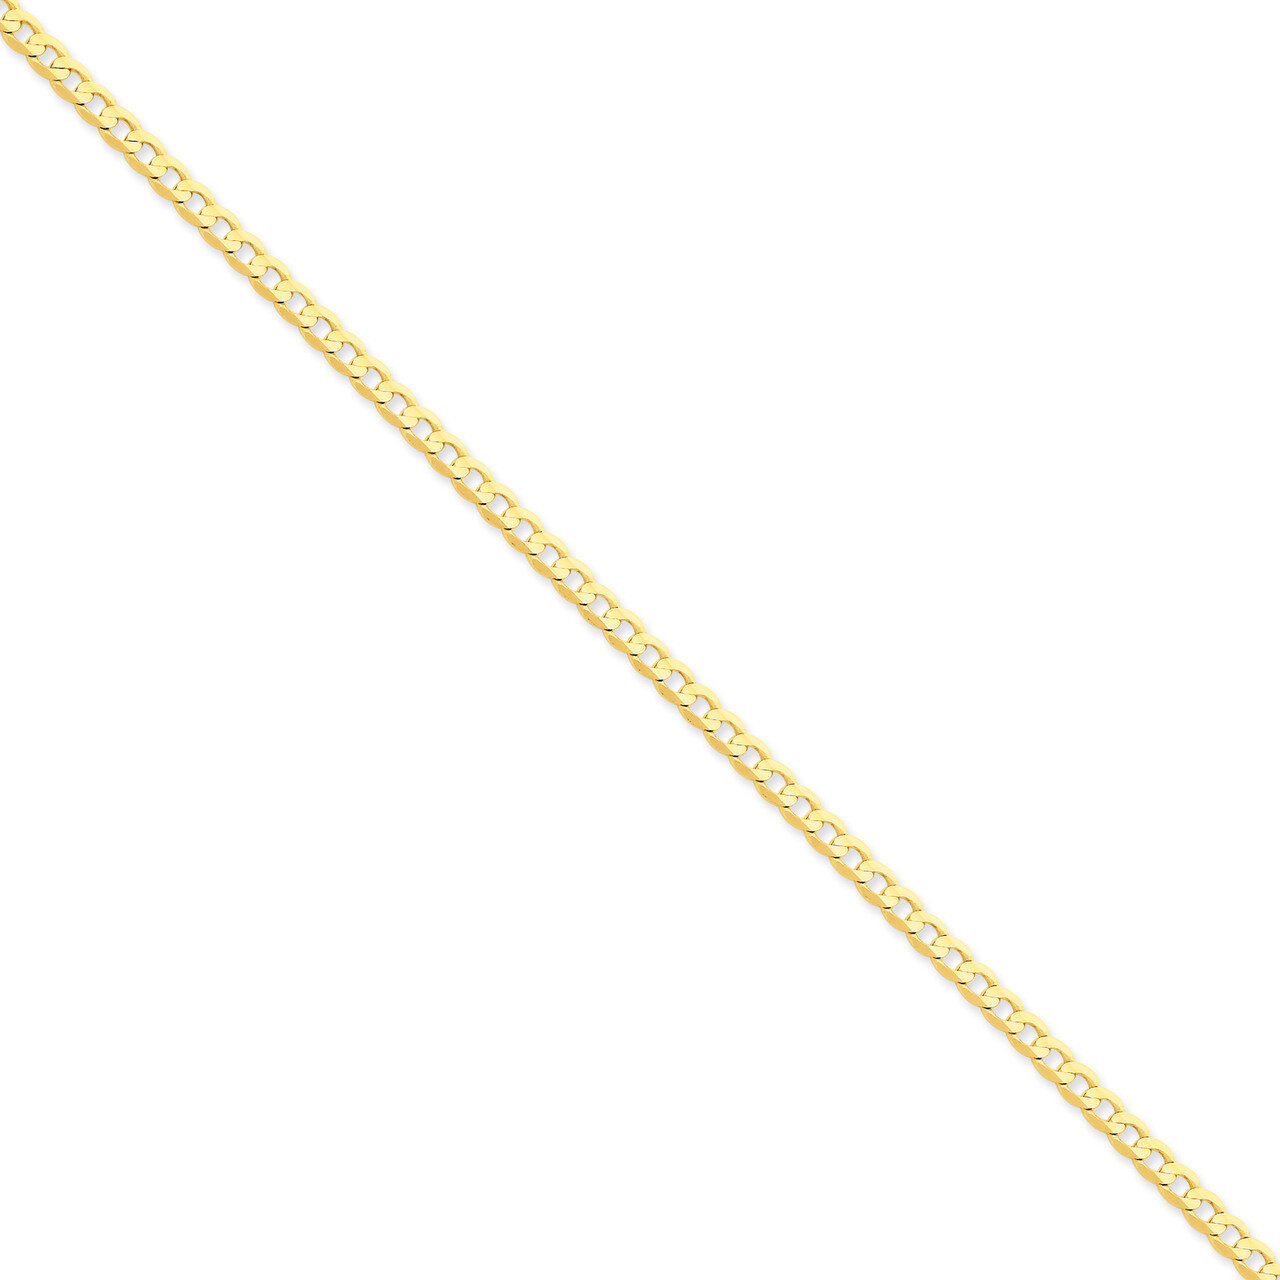 3.8mm Concave Curb Chain 20 Inch 14k Gold LCR100-20